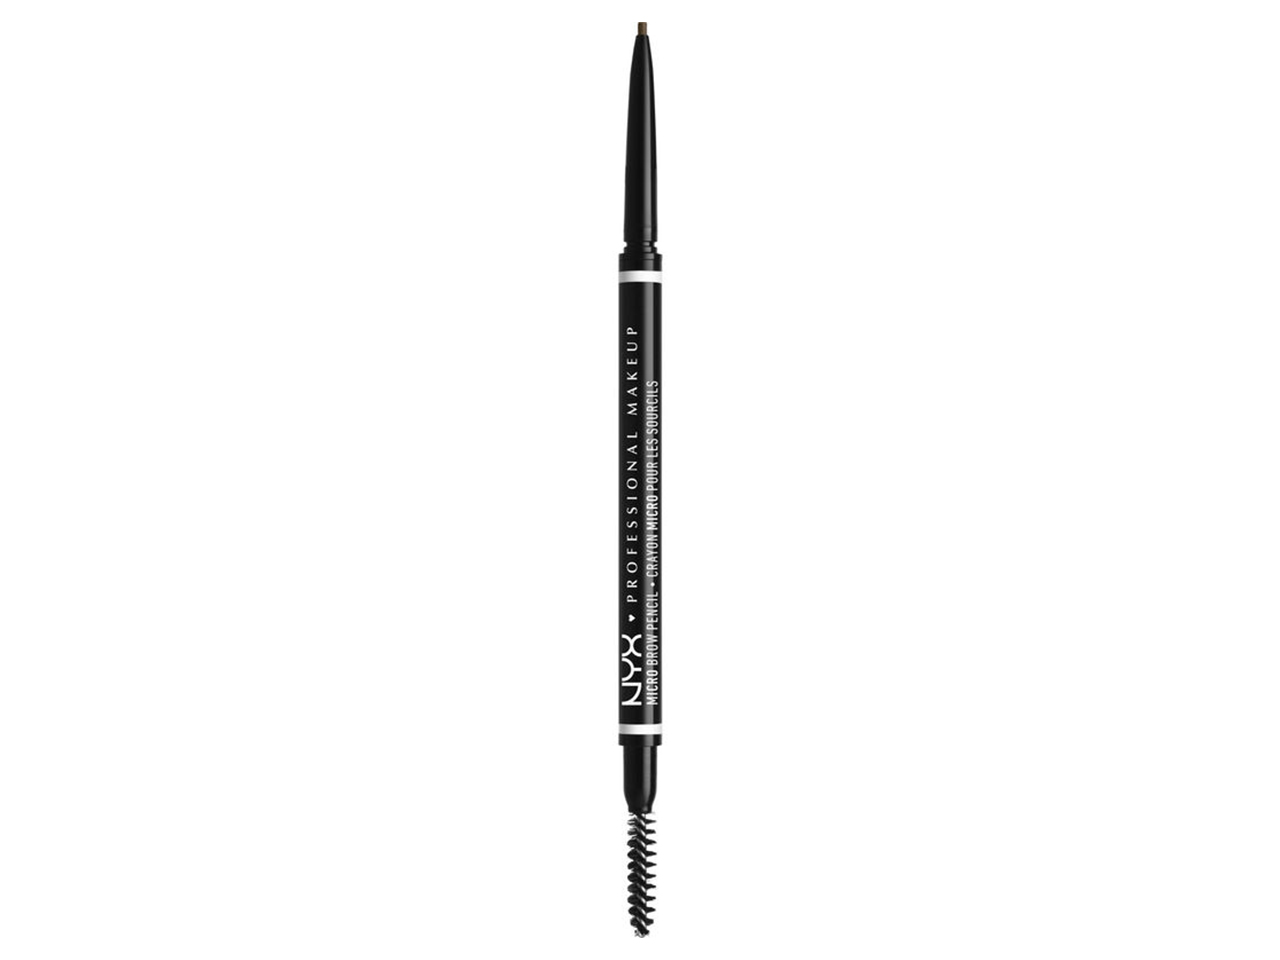 A fine eyebrow pencil with a brush on one end from NYX Cosmetics.